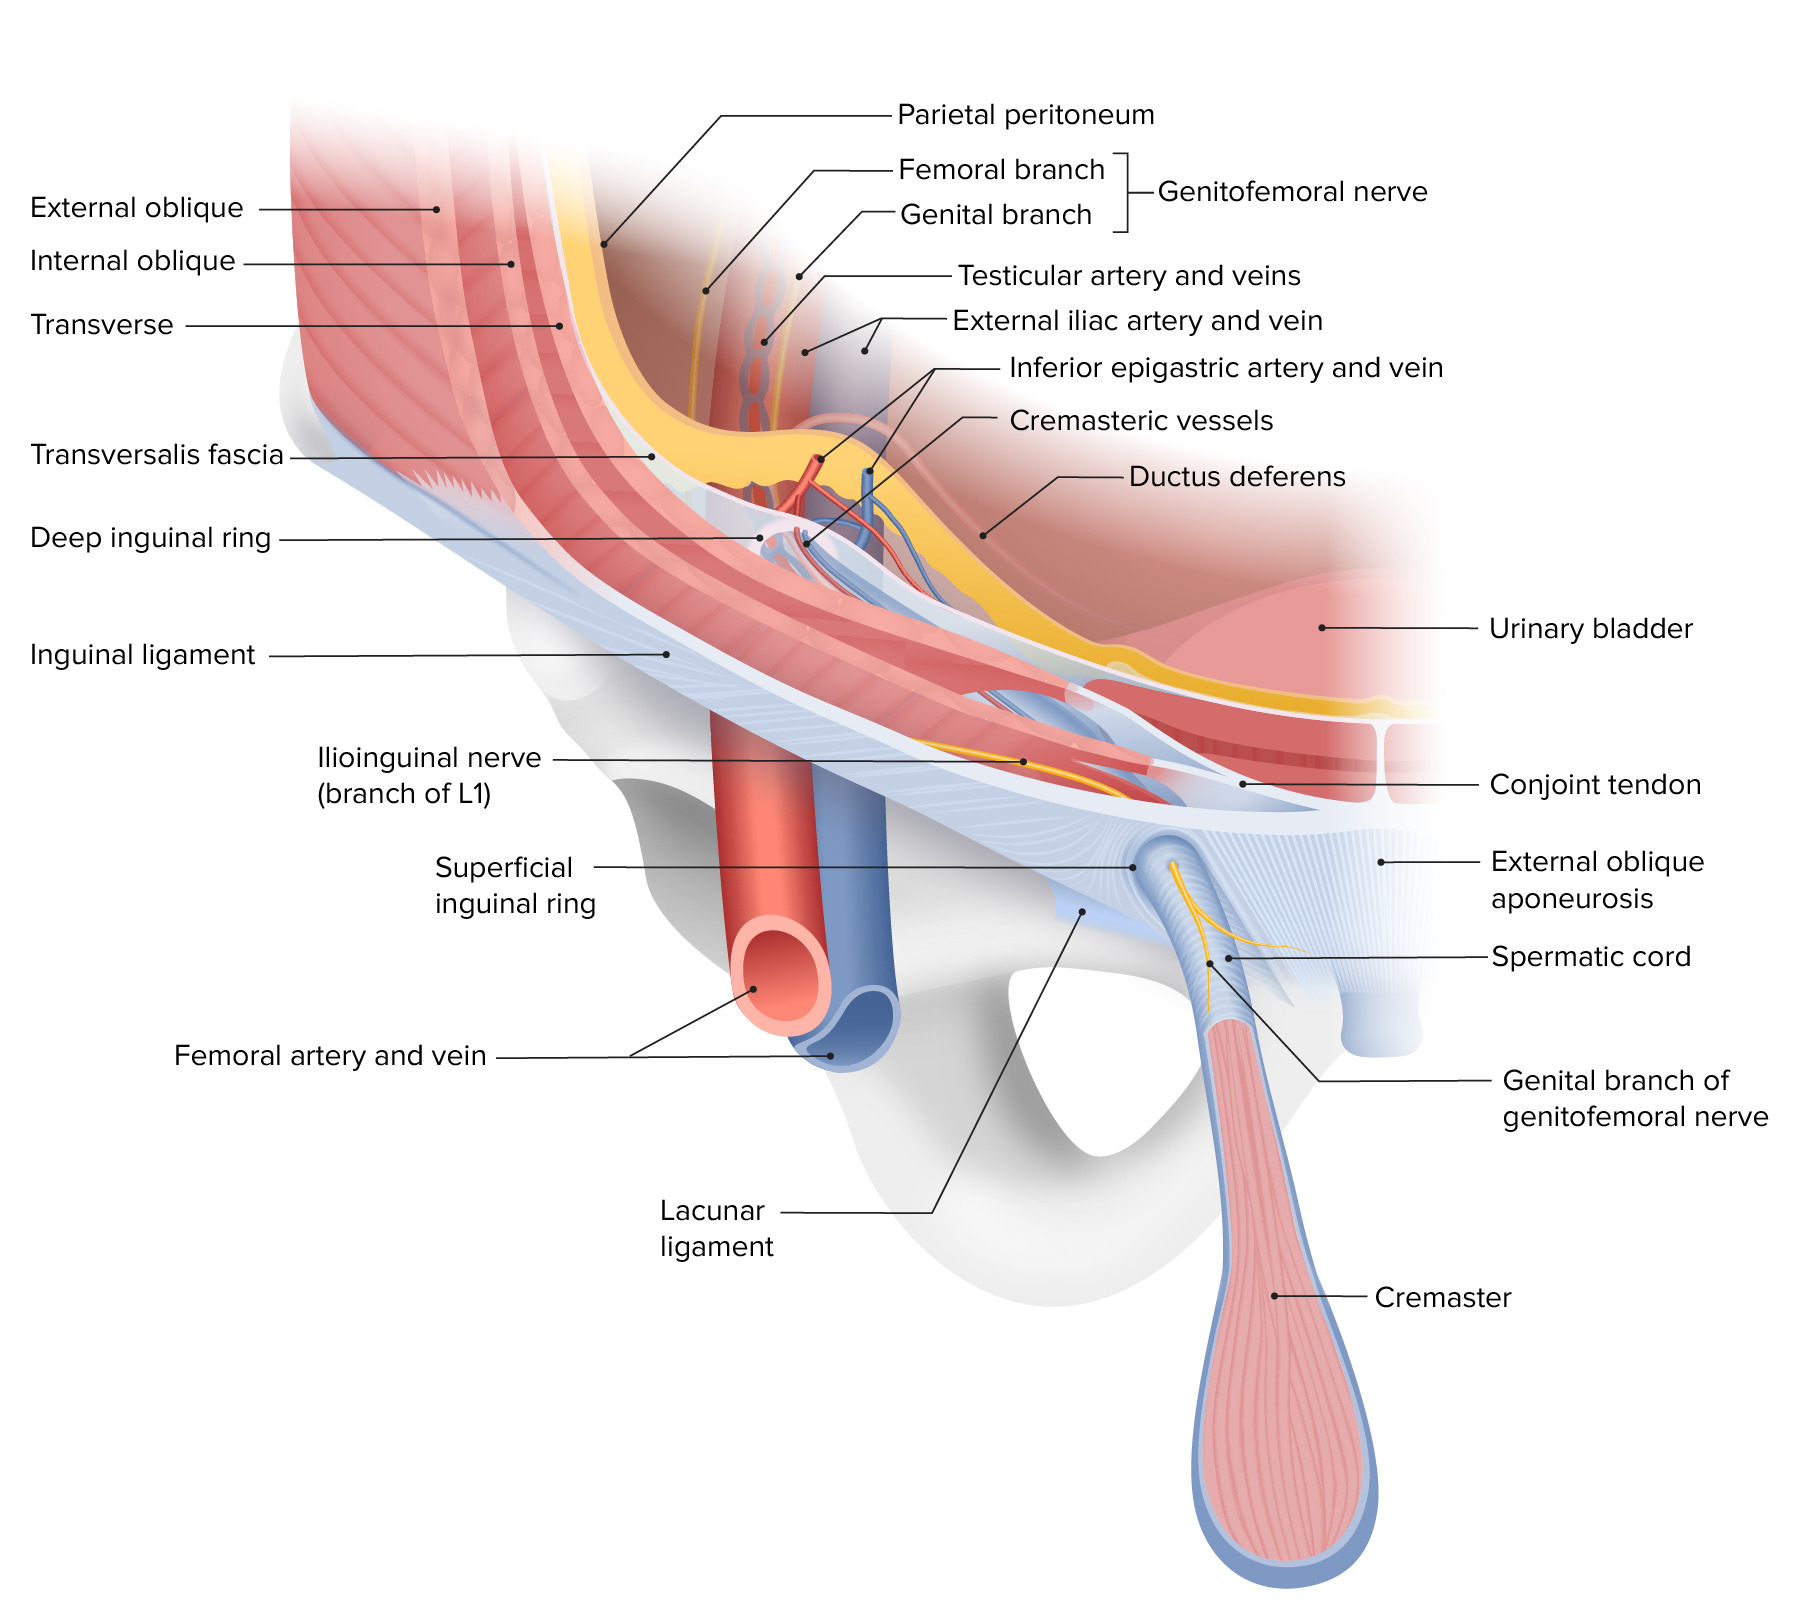 Abdominal wall layers of the inguinal canal, semi 3D exploded view -  English labels